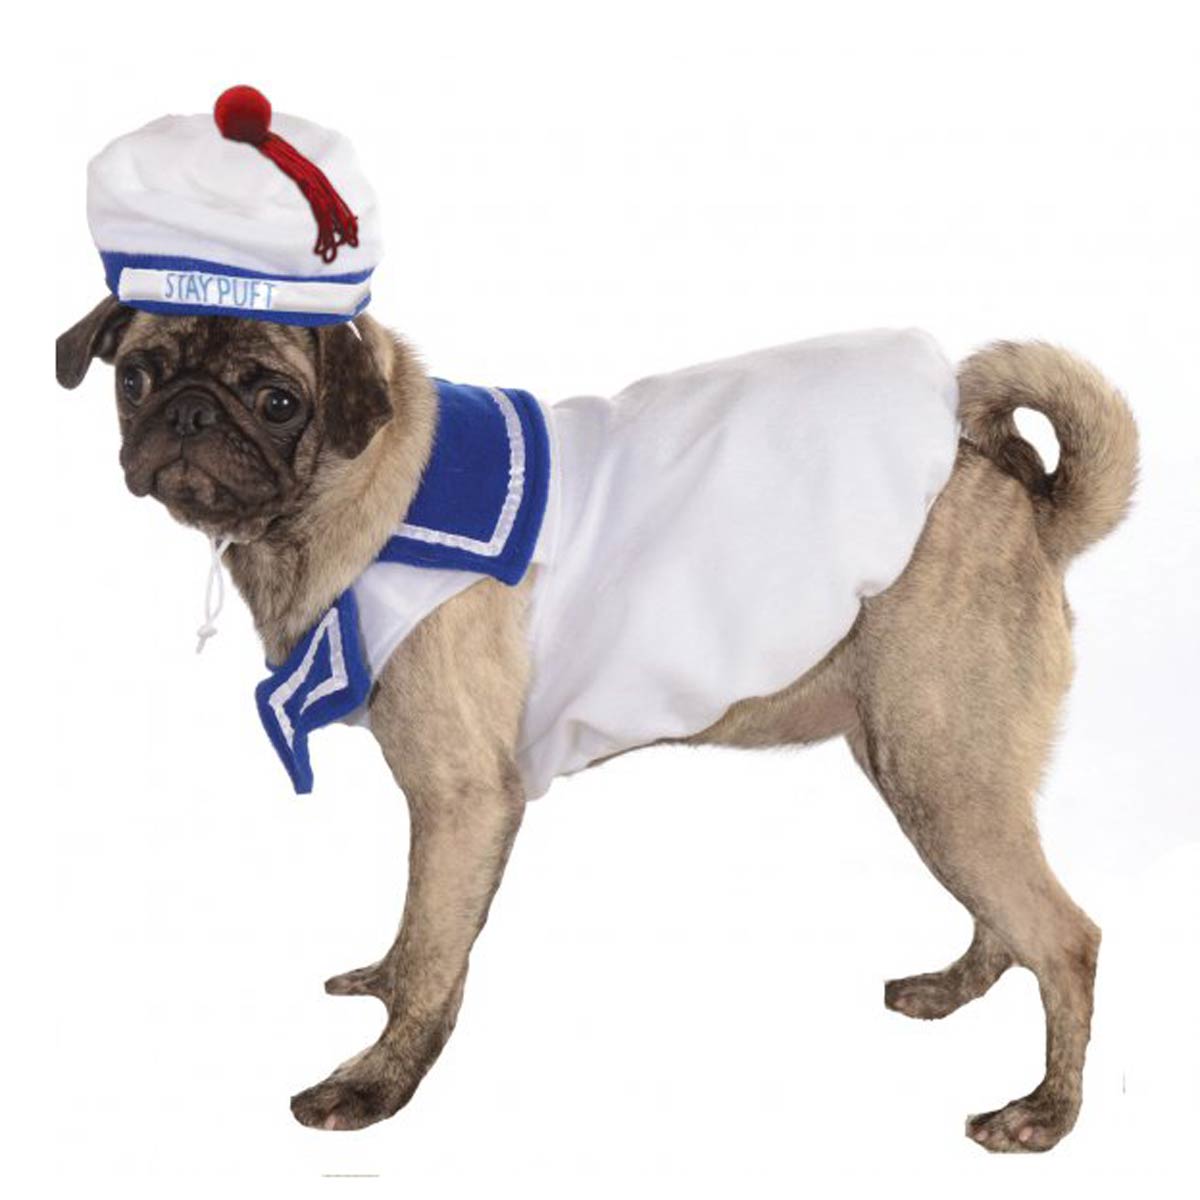 Ghostbusters Stay-Puft Marshmallow Man Dog Costume